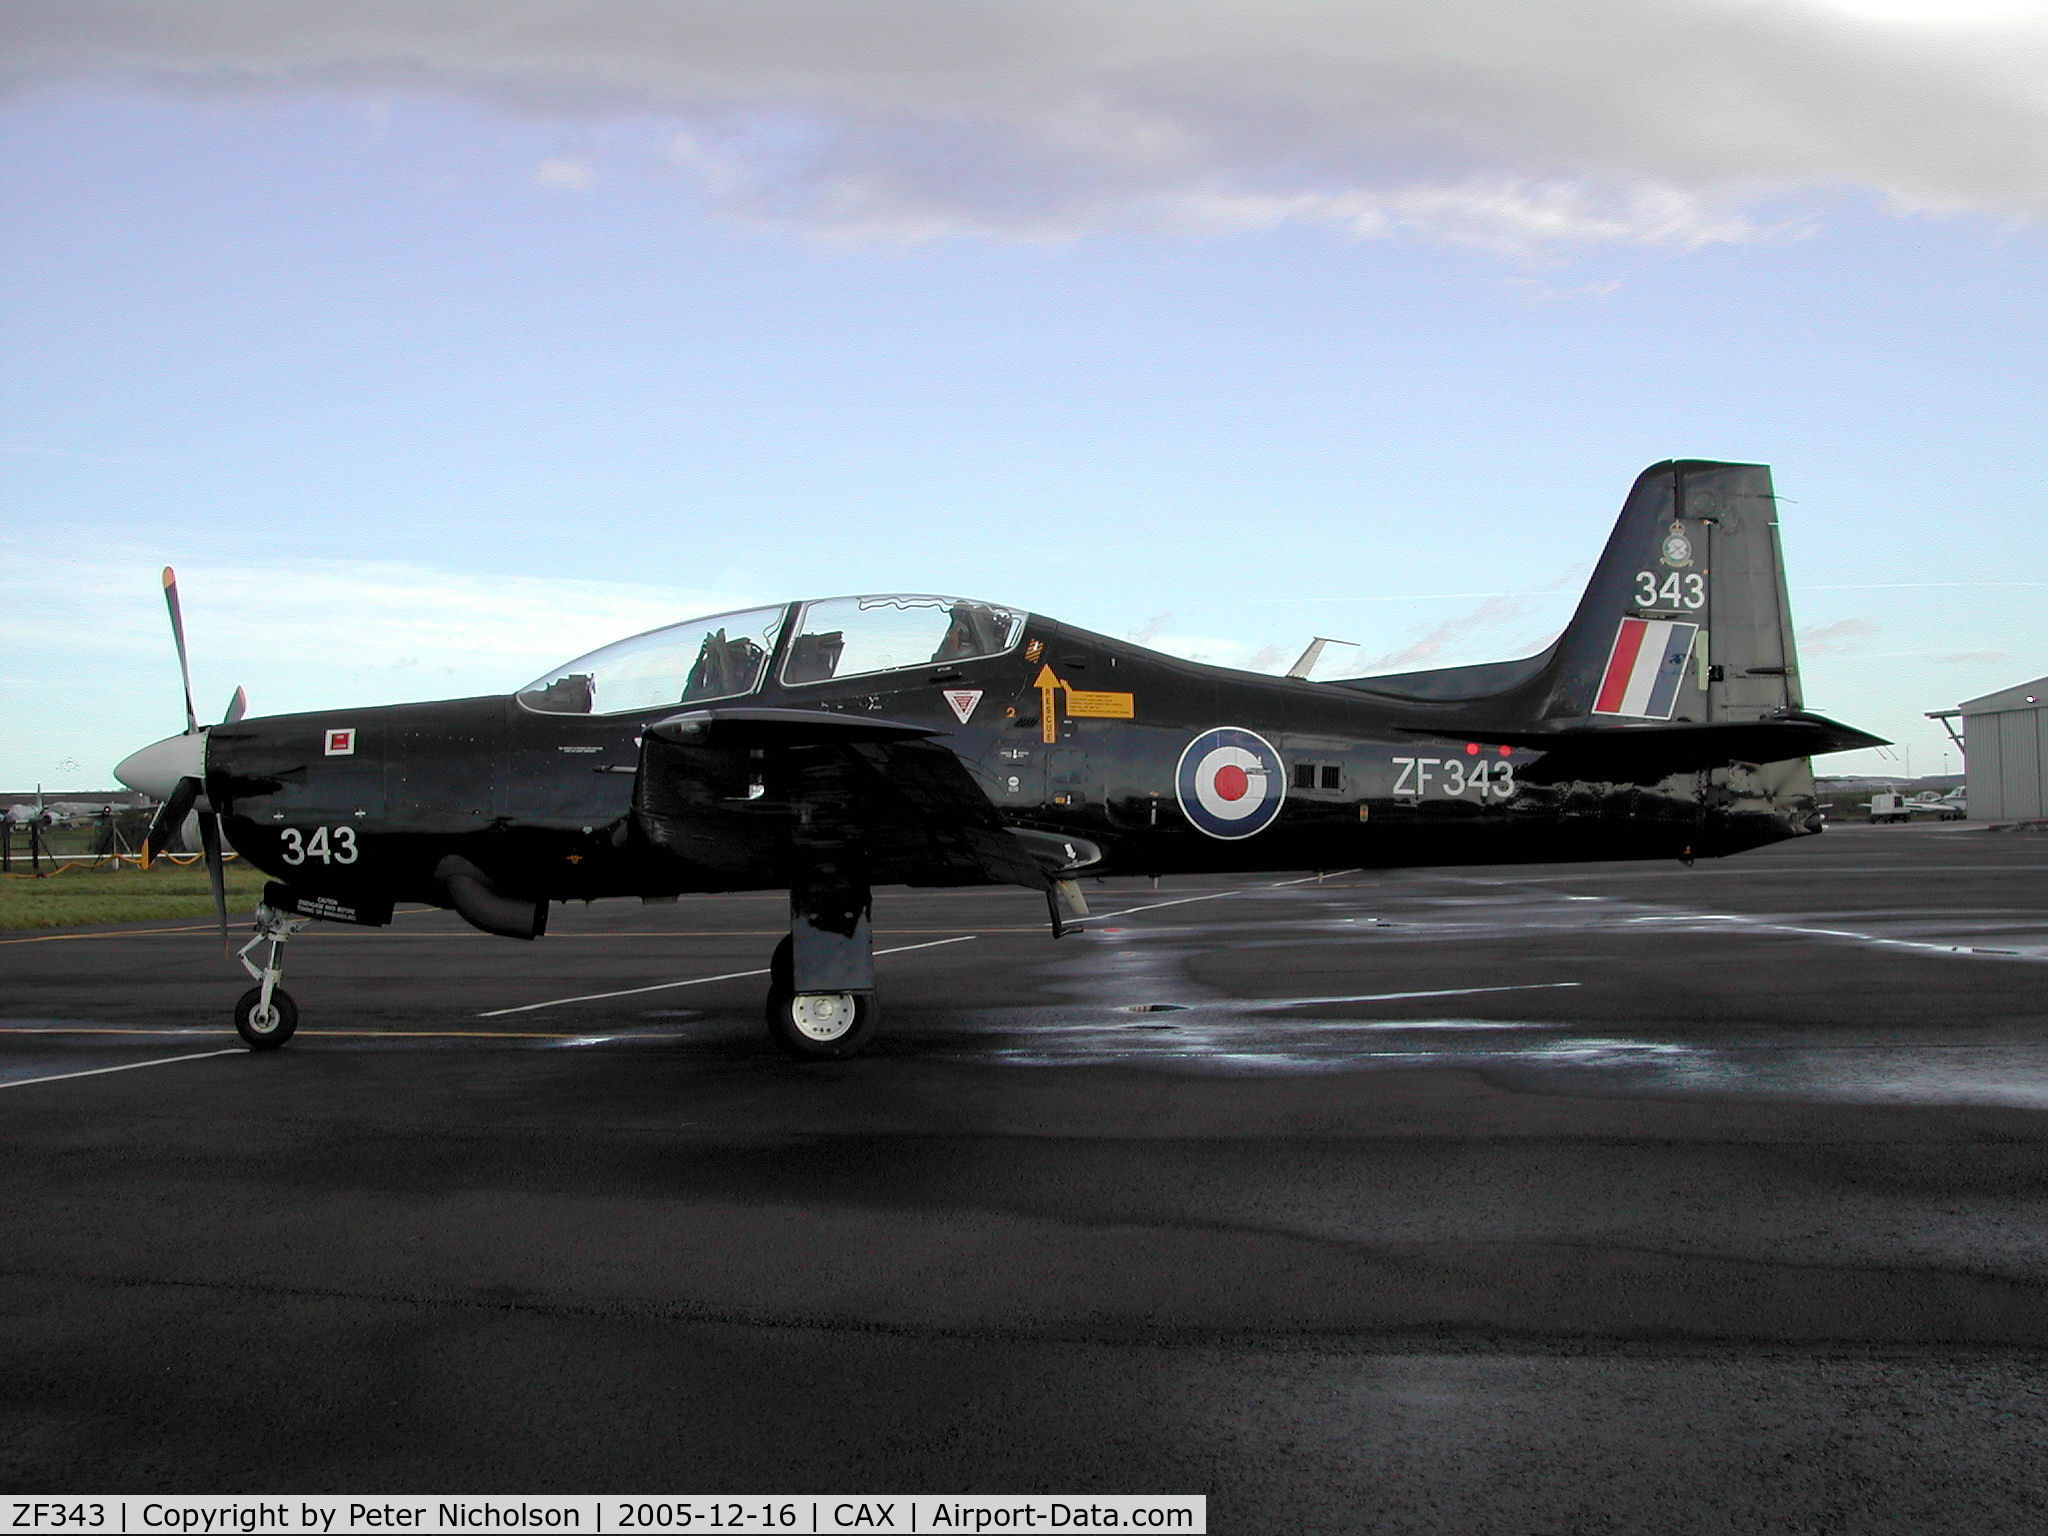 ZF343, 1991 Short S-312 Tucano T1 C/N S107/T78, Tucano T.1 of 1 Flying Training School at RAF Linton-on-Ouse on a visit to Carlisle in December 2005.